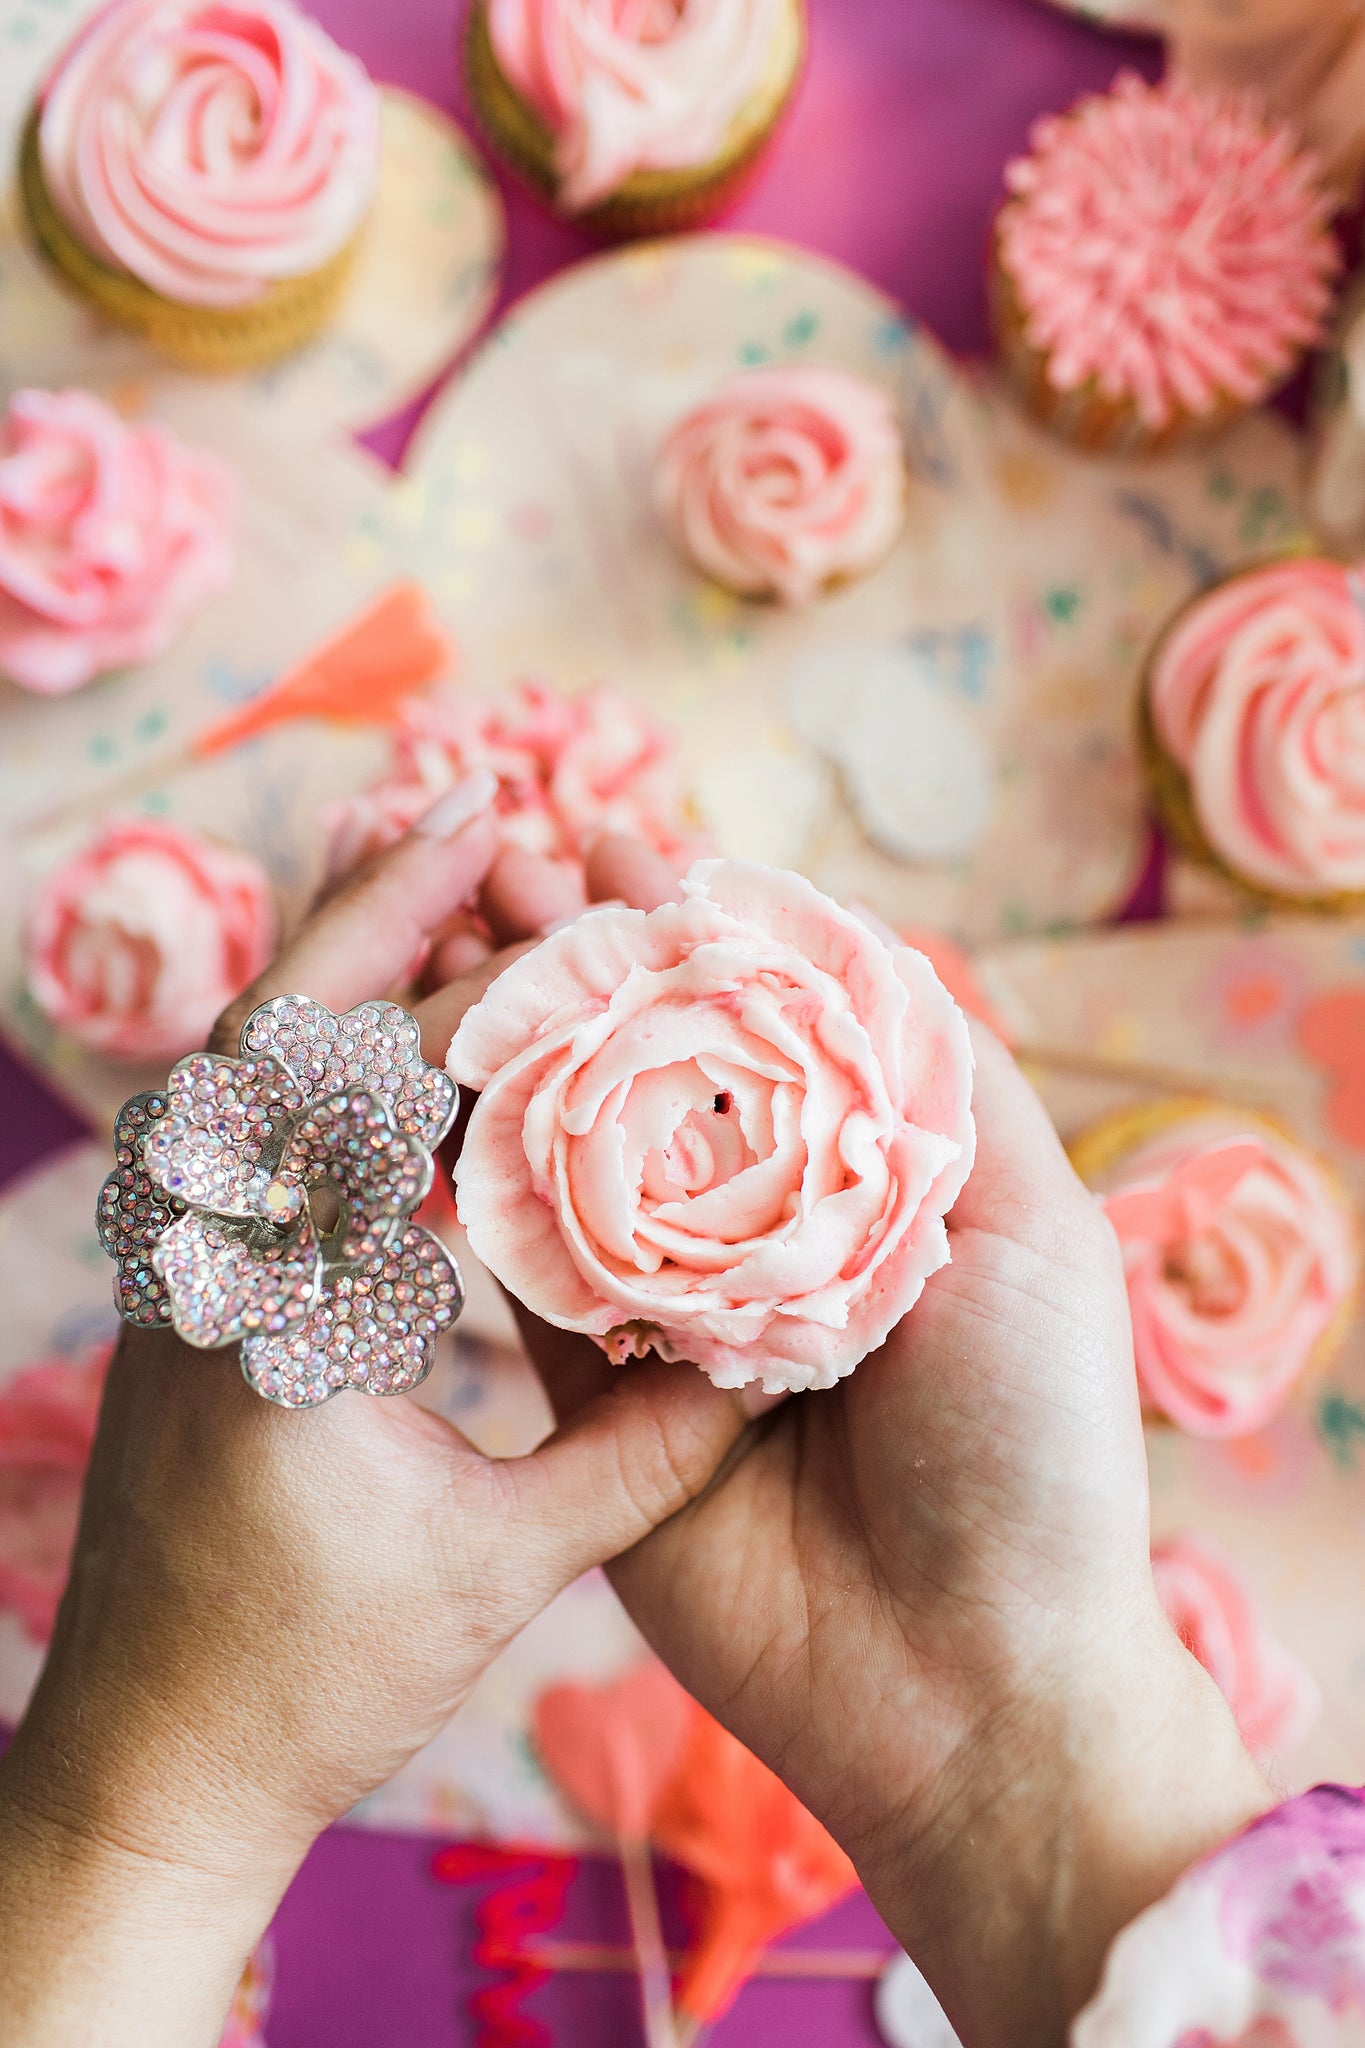 Valentine's Day cupcakes with rose frosting